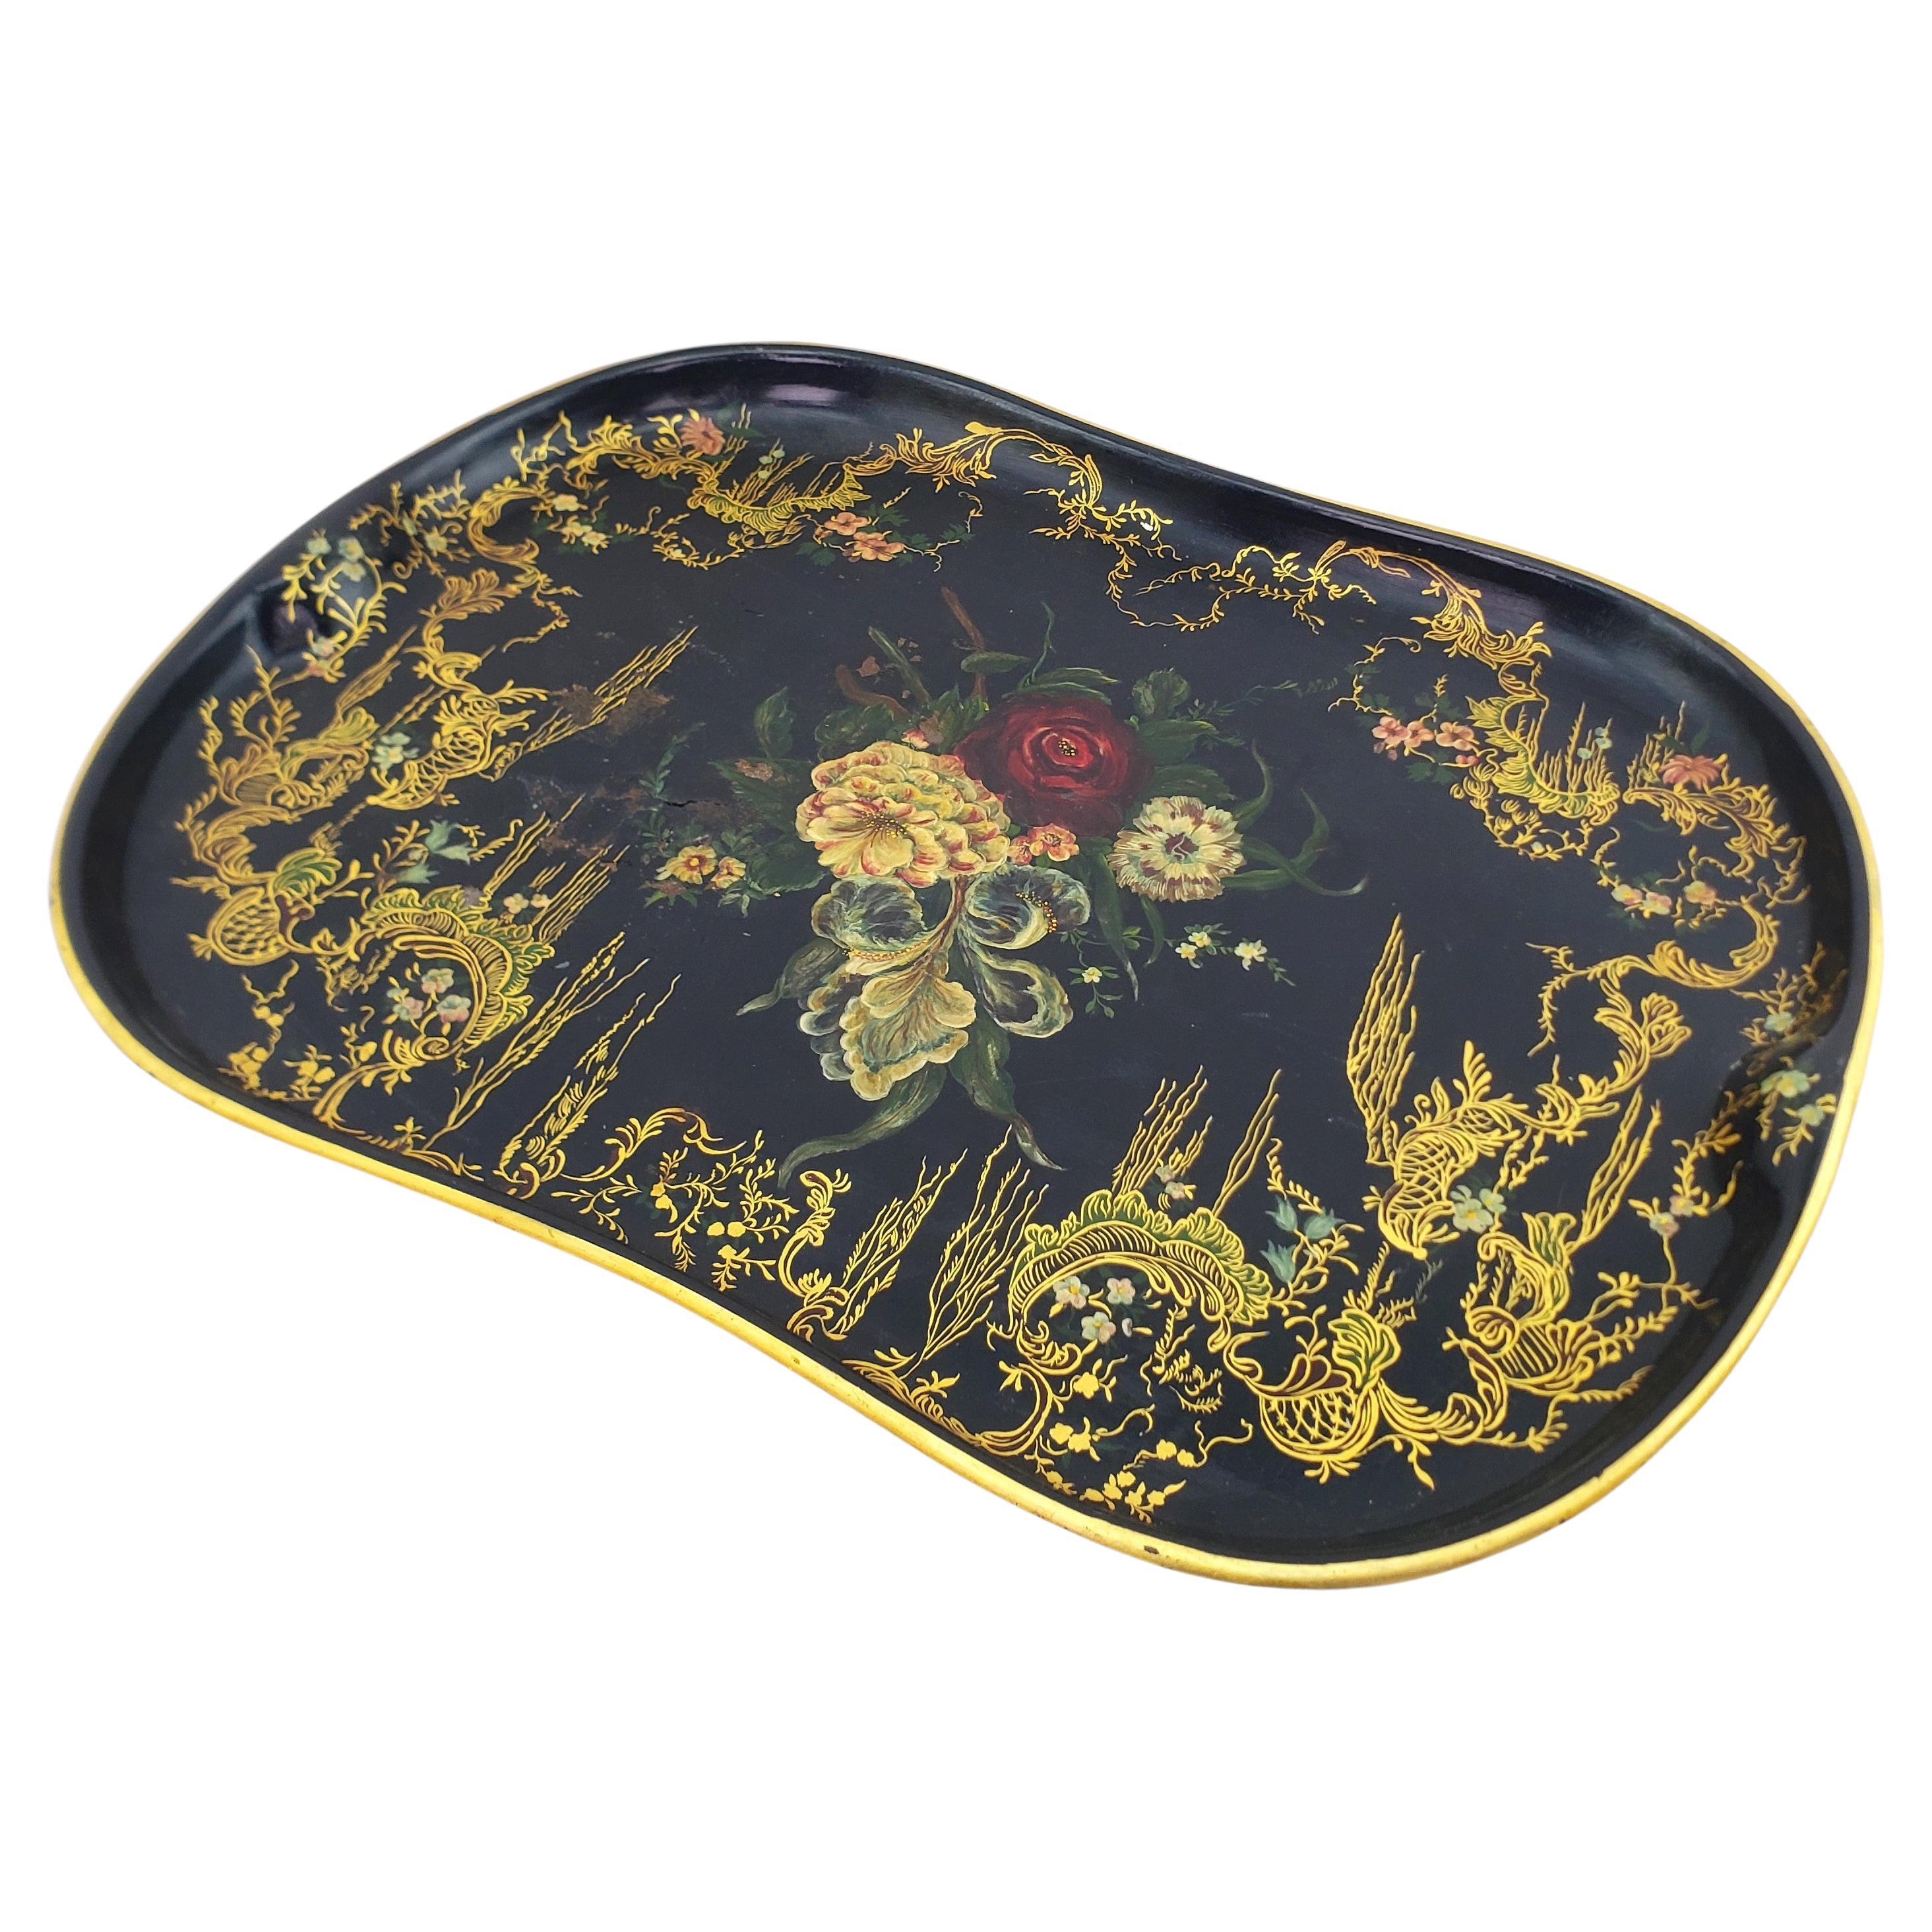 Large Antique Toleware Serving Tray with Floral Decoration & Gilt Accents